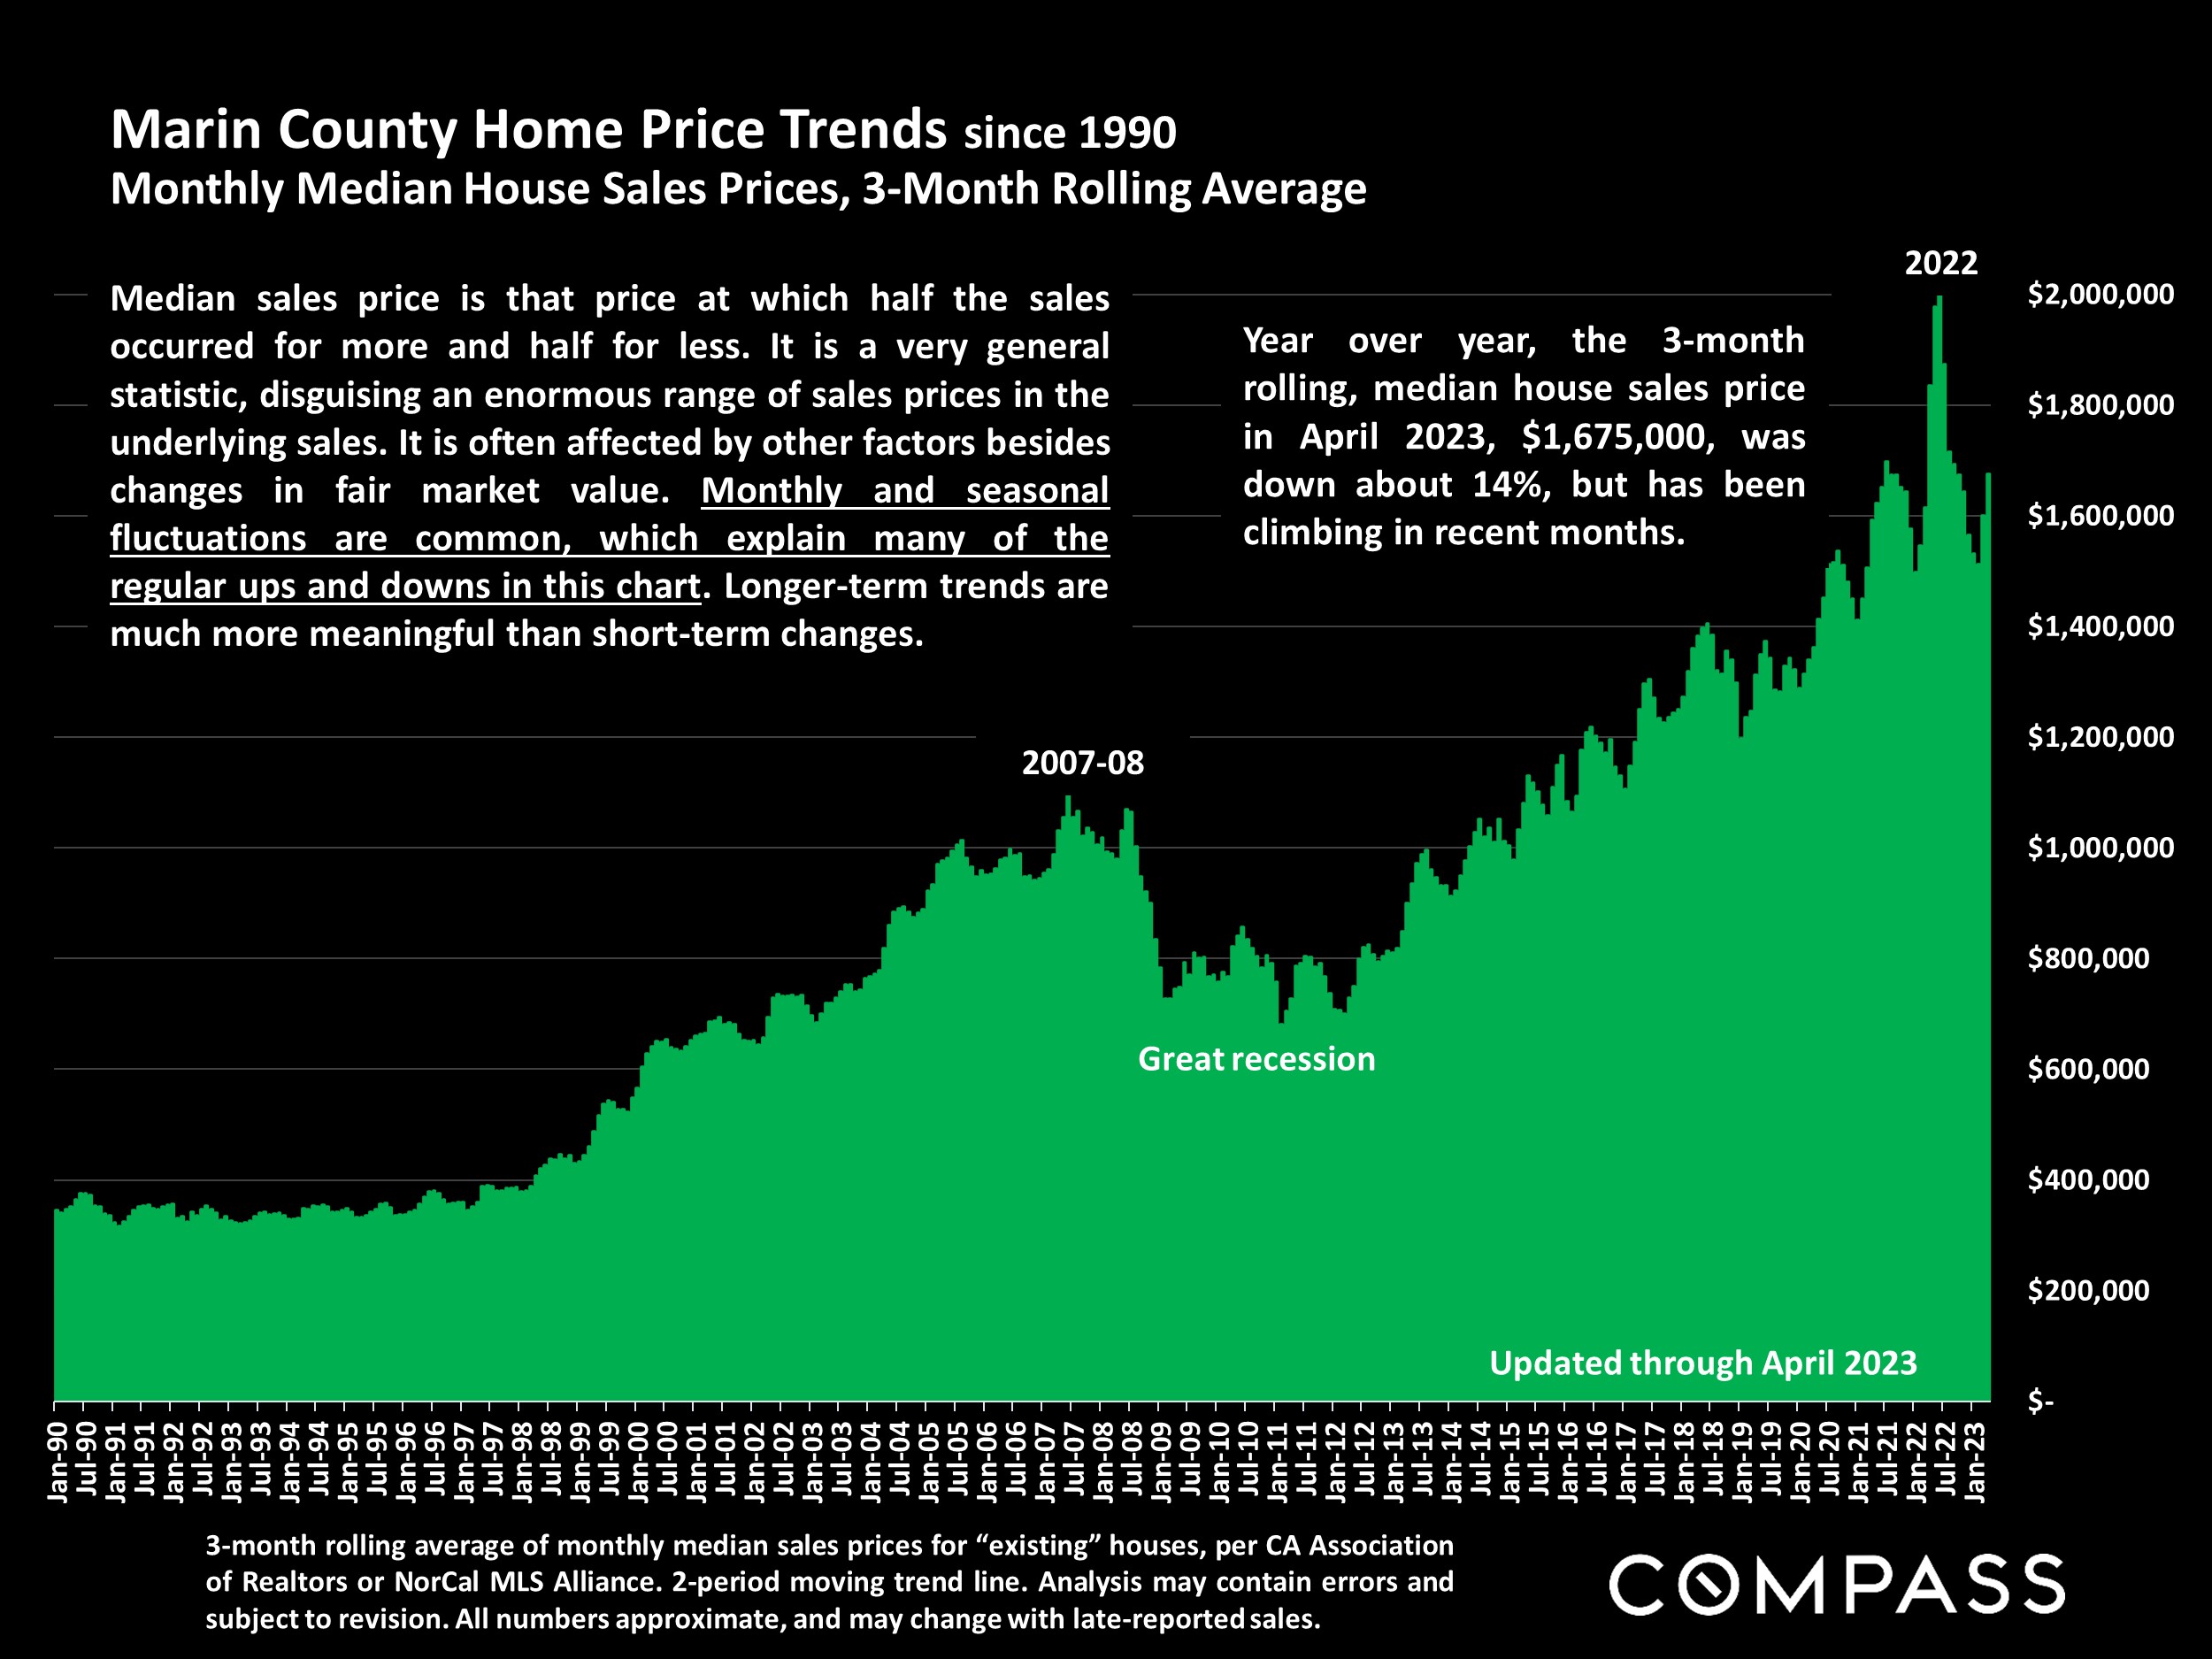 Marin County Home Price Trends since 1990